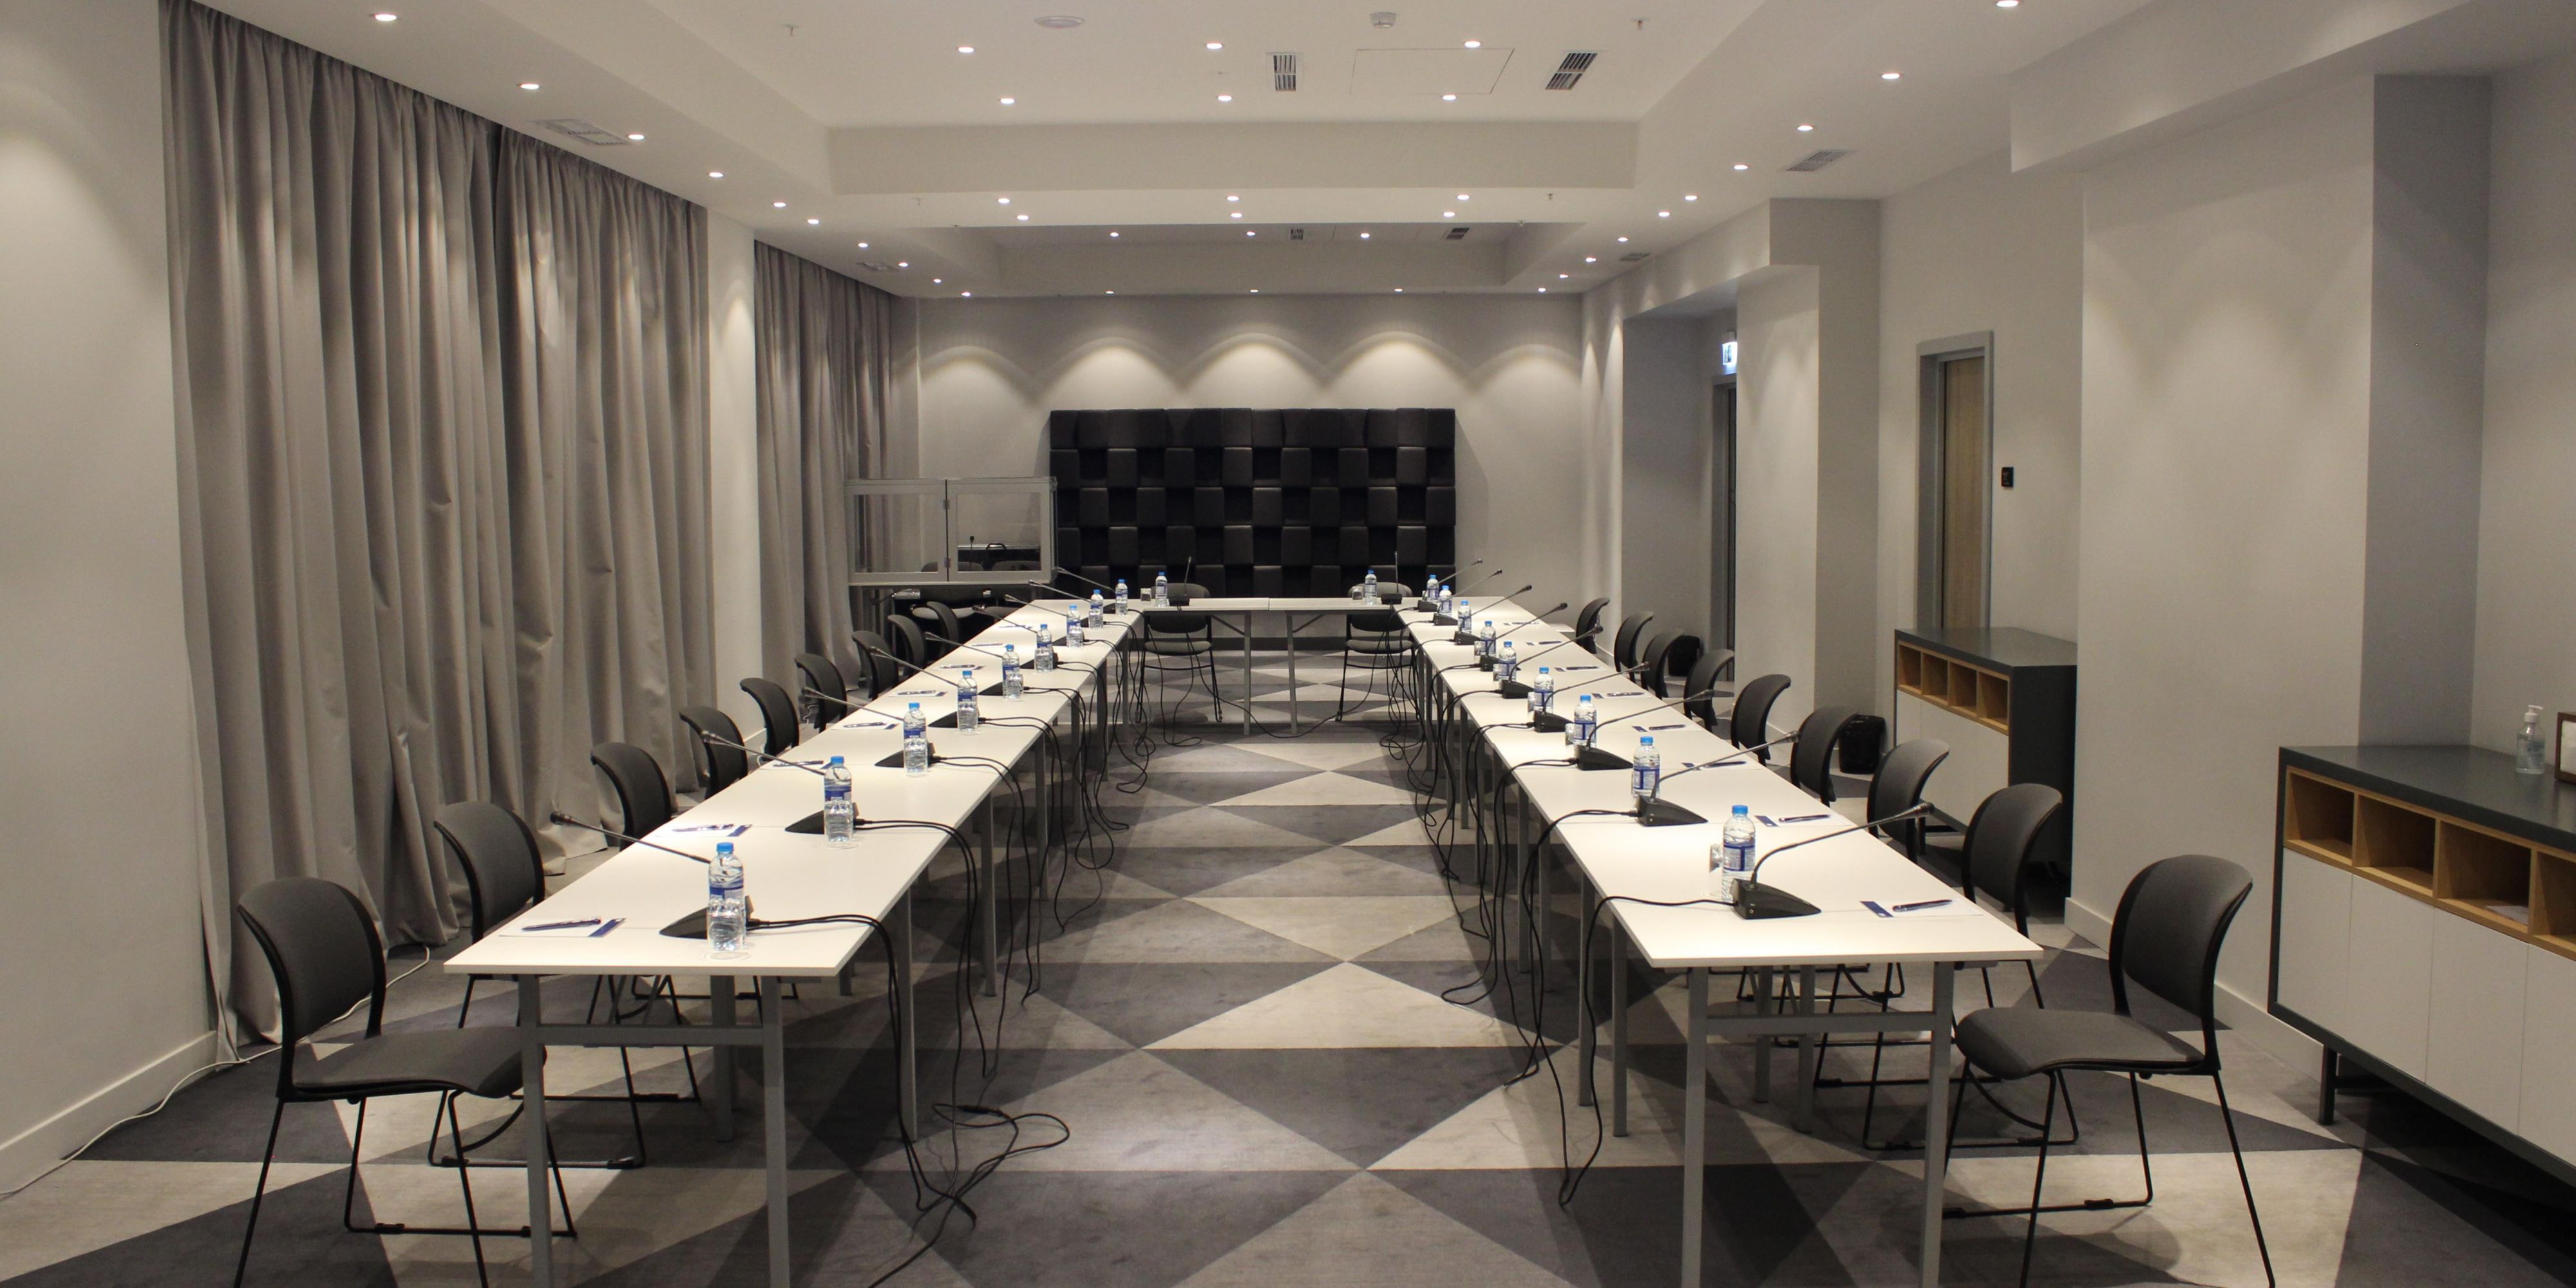 Organize your meetings and conferences in our 120 sq. m. modern meeting venue which can host up to 120 people. It is equipped with all the necessary equipment including HD projector and sound system with wireless microphones. It offers various arrangements to meet your needs. Go out of the hall and have the best coffee break, lunch or dinner. 